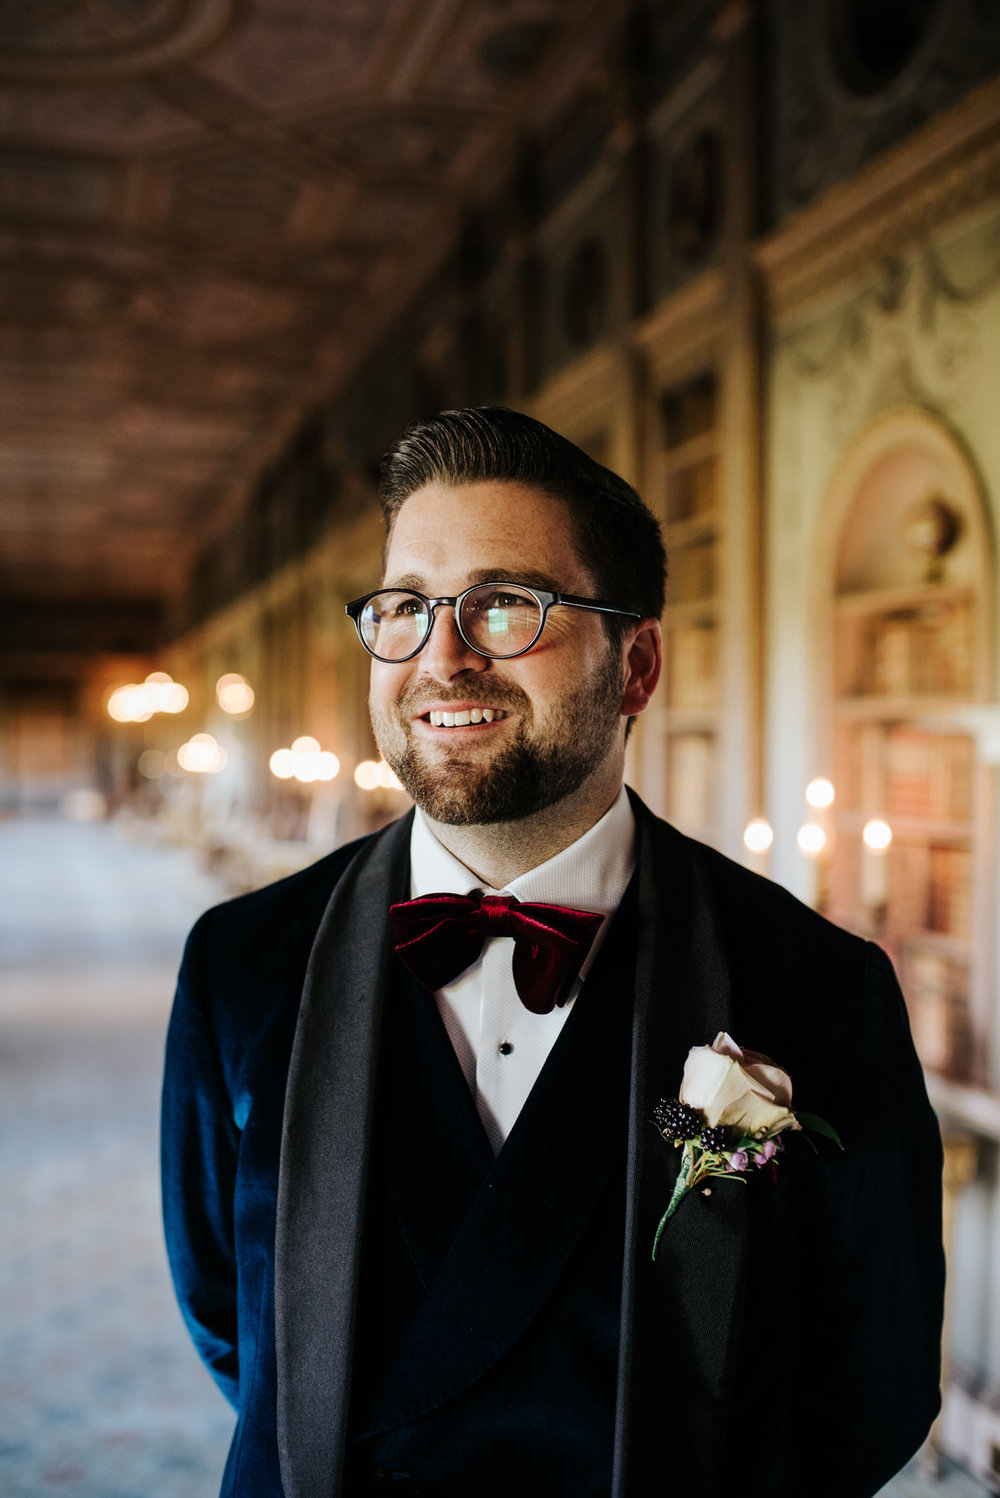 Candid portrait of the groom as he stands in Syon House's library room and looks dapper